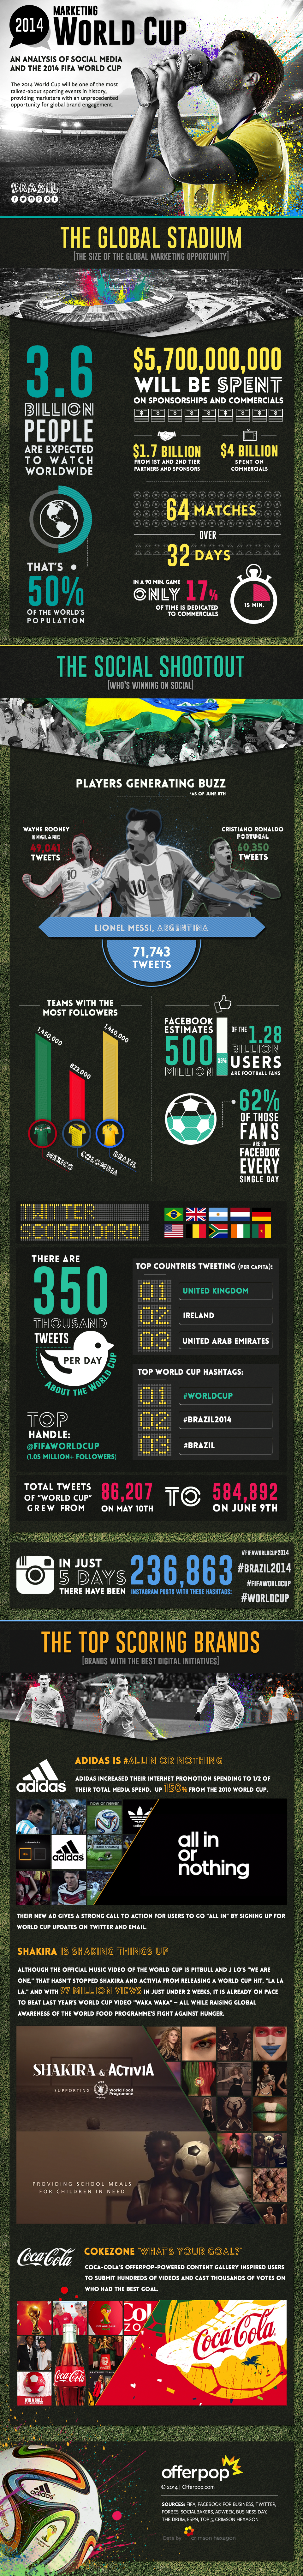 World-cup-infographic-Final1